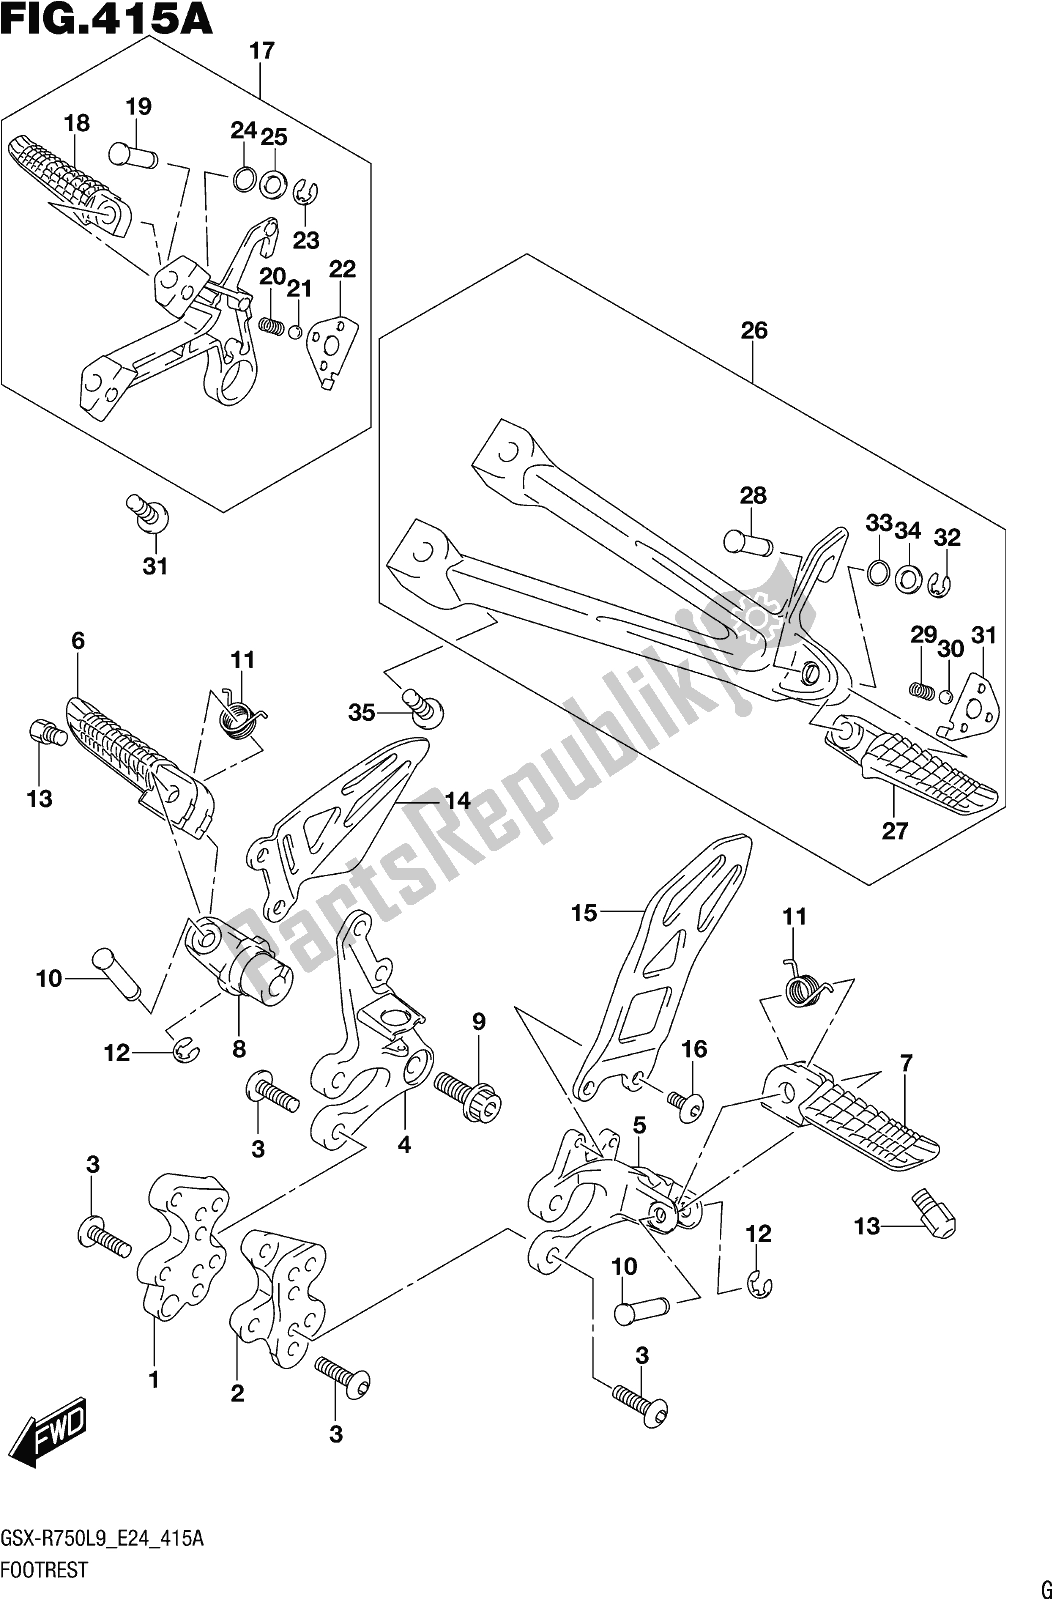 All parts for the Fig. 415a Footrest of the Suzuki Gsx-r 750 2019